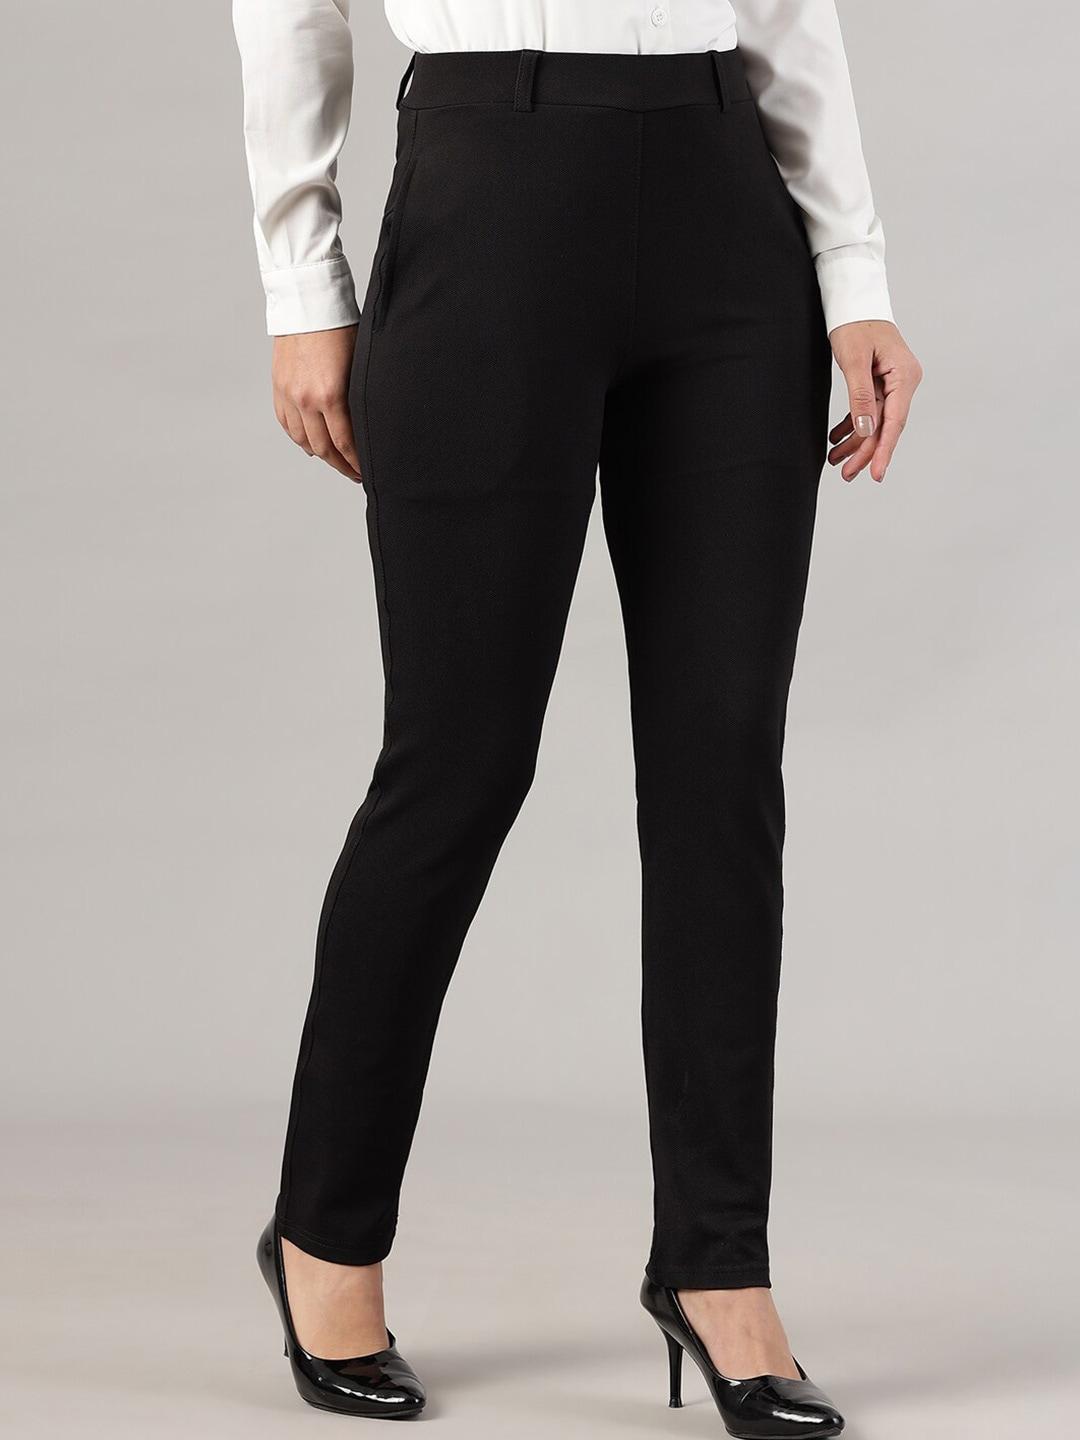 fithub women black slim fit high-rise cotton formal trousers